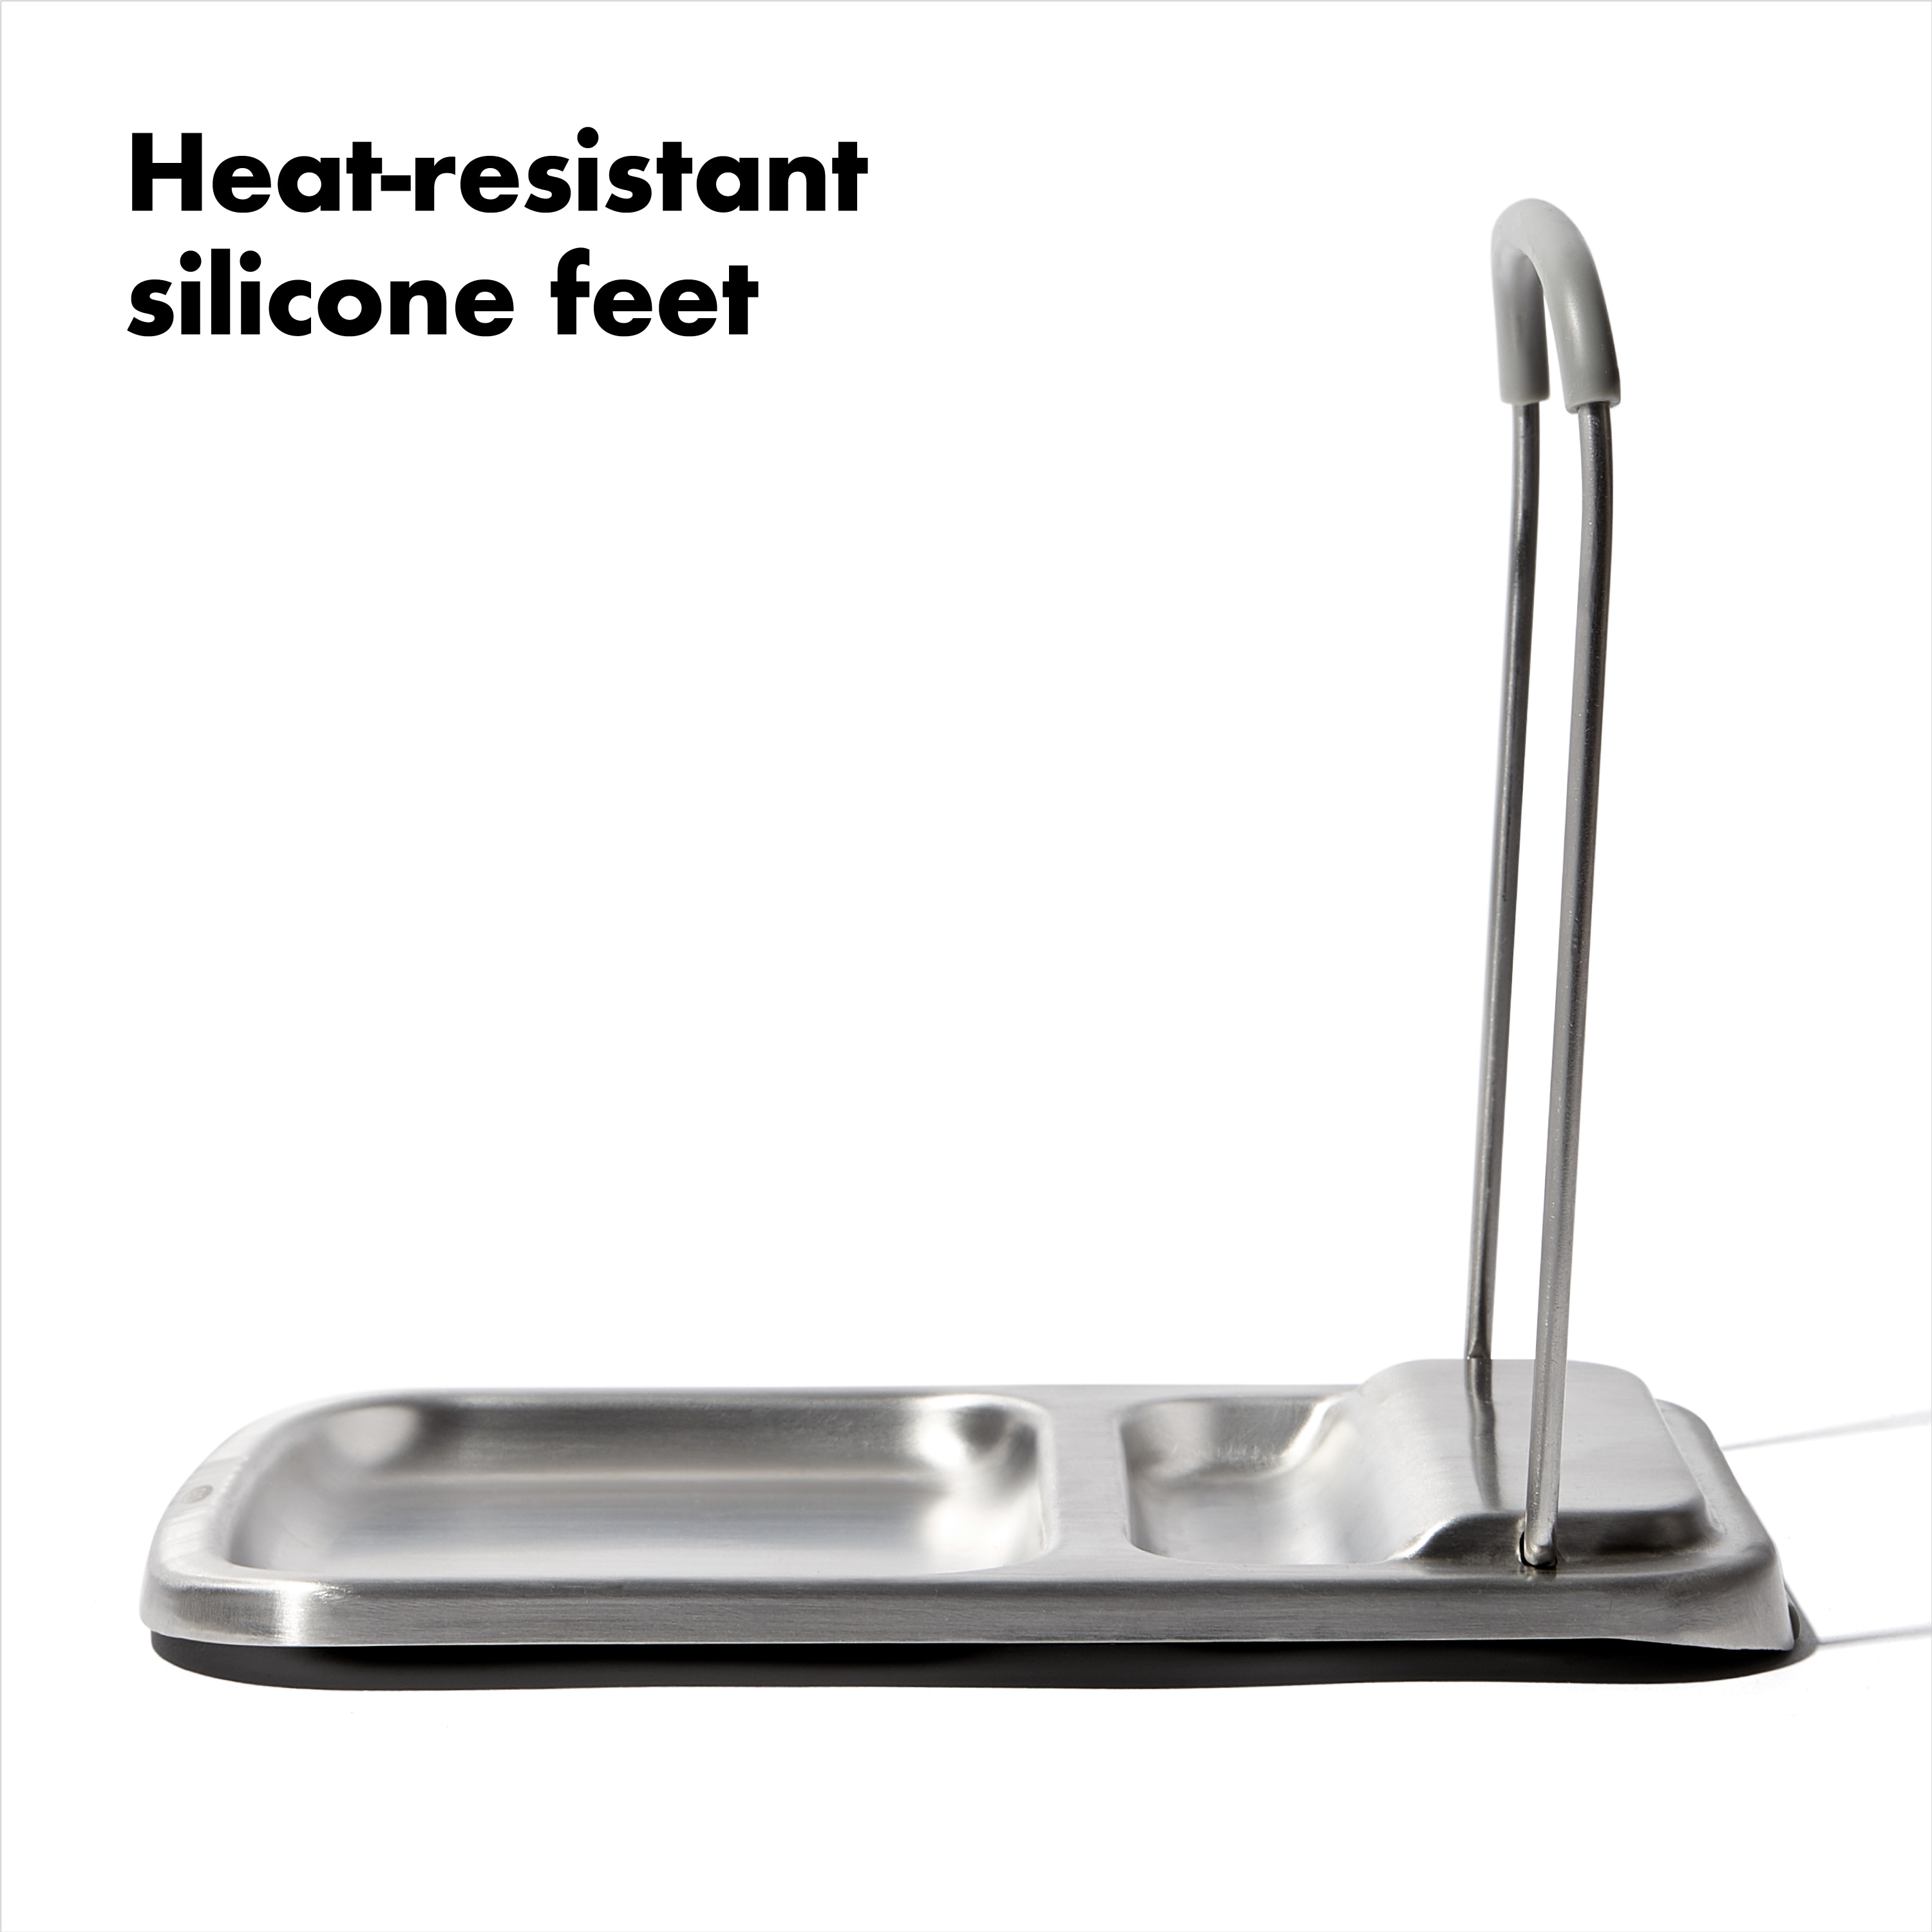 Stainless Steel Ladle Rest - 5 3/8Dia x 10 1/4H